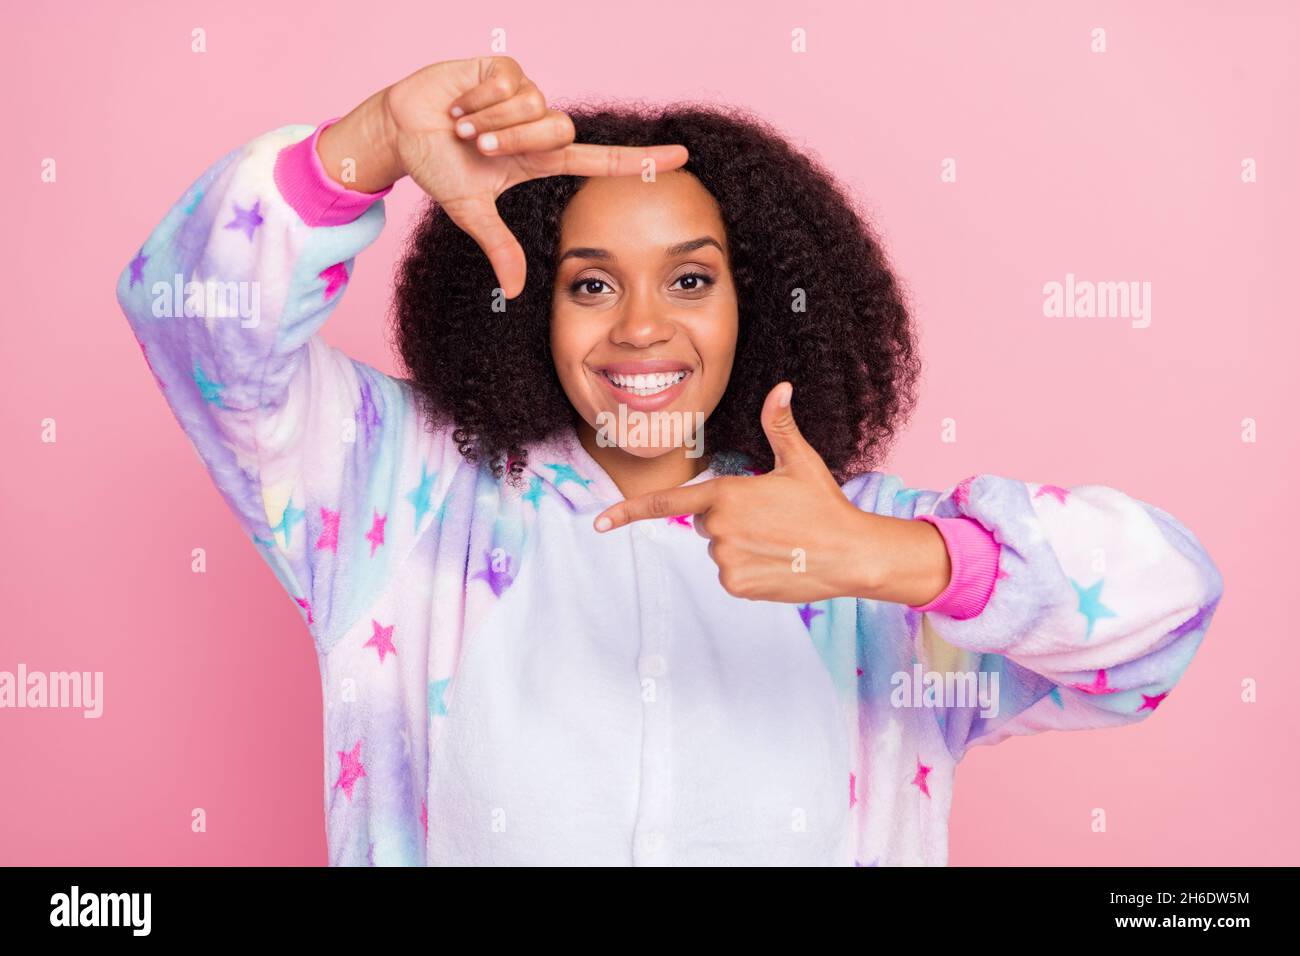 Photo of young afro girl gesture fingers snapshot border portrait perspective isolated over pink color background Stock Photo